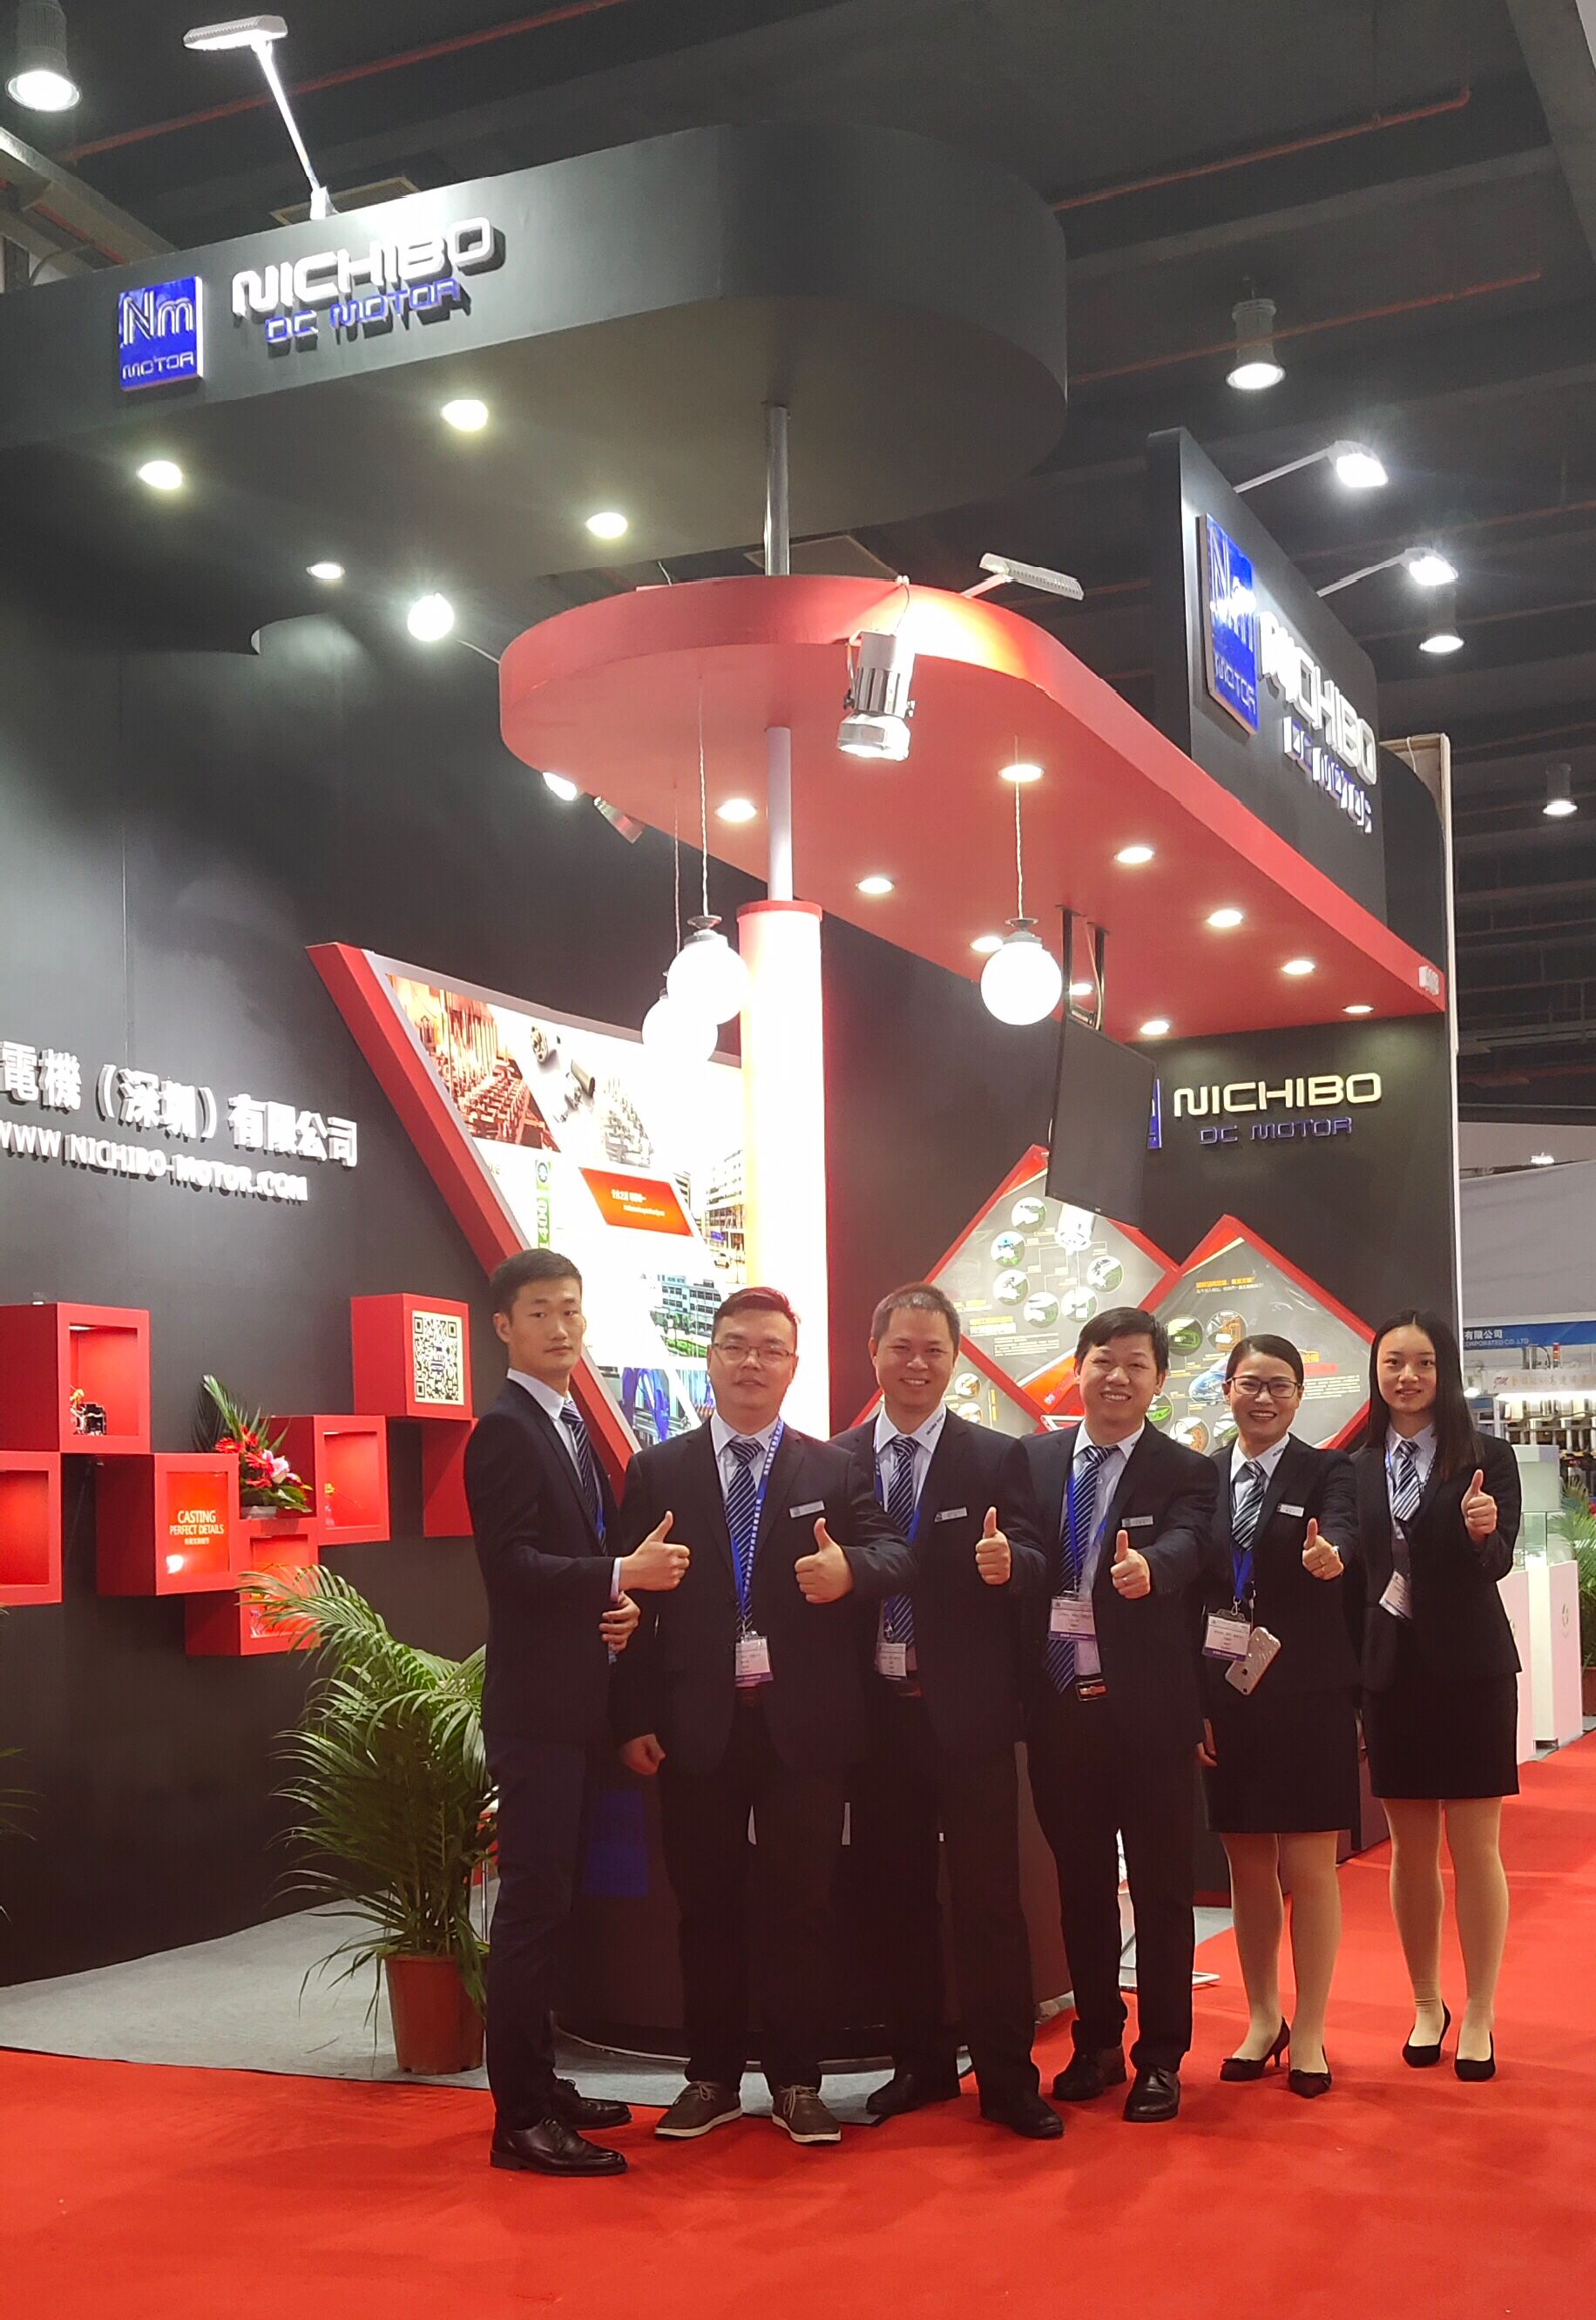 NICHIBO DC MOTOR Joined The 23rd China (International Small Motor Technology Conference & Exhibition.